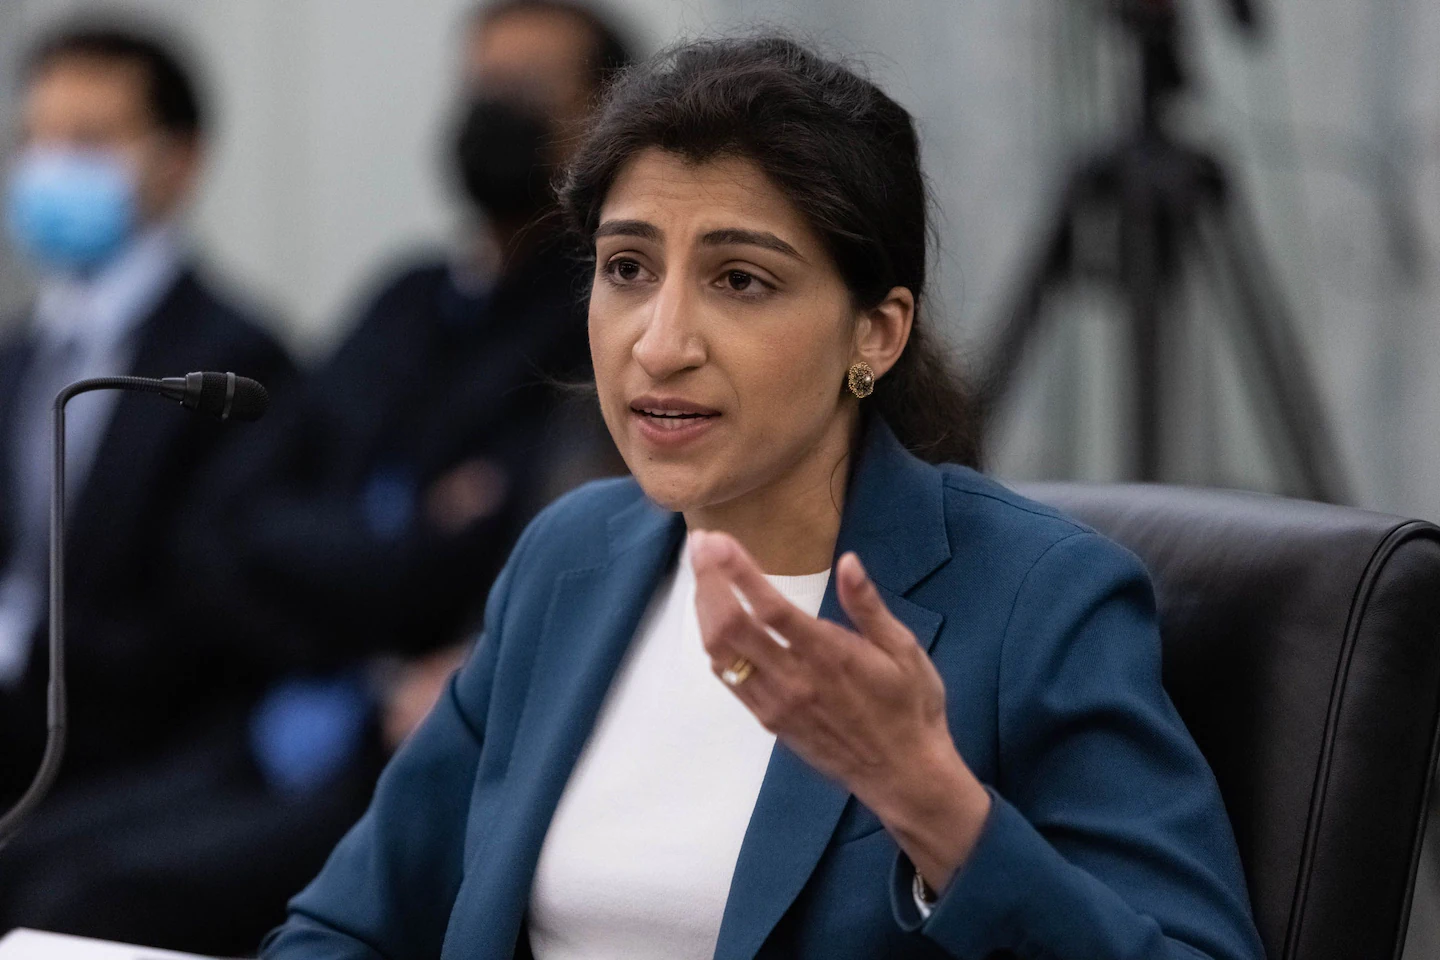 The Technology 202: FTC chair Lina Khan holds open meeting amid early challenges - The Washington Post